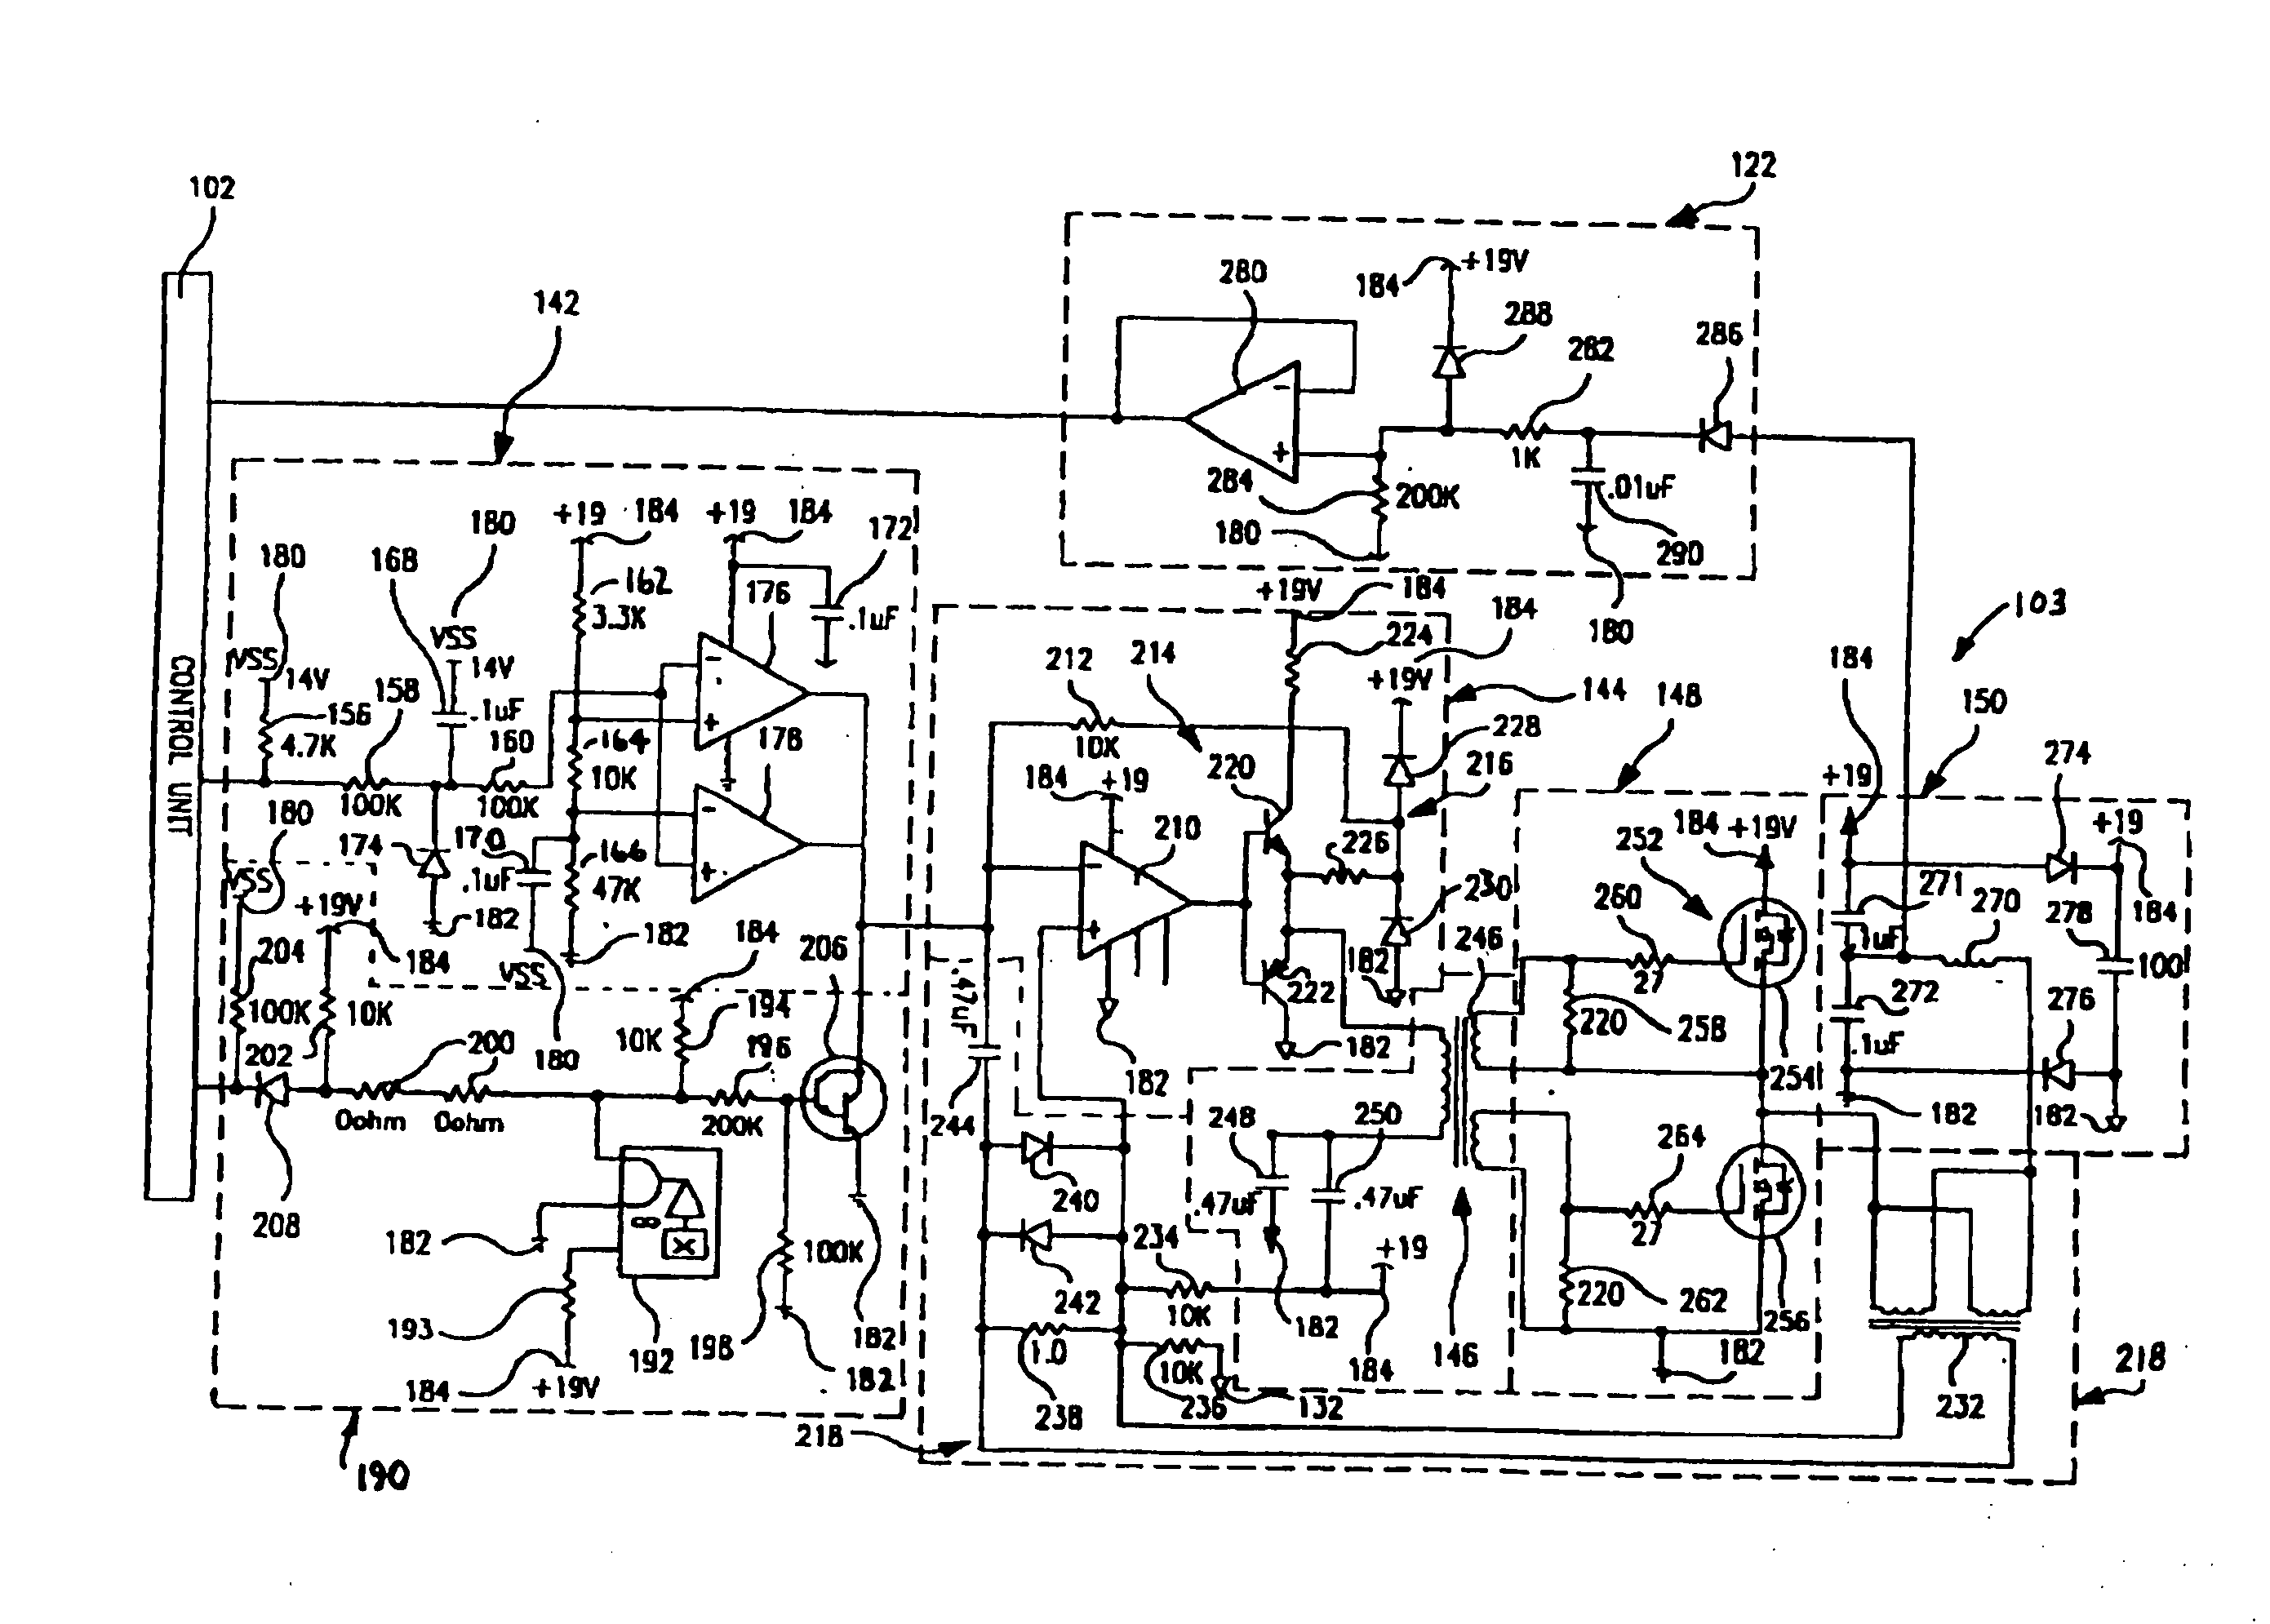 Inductively coupled ballast circuit